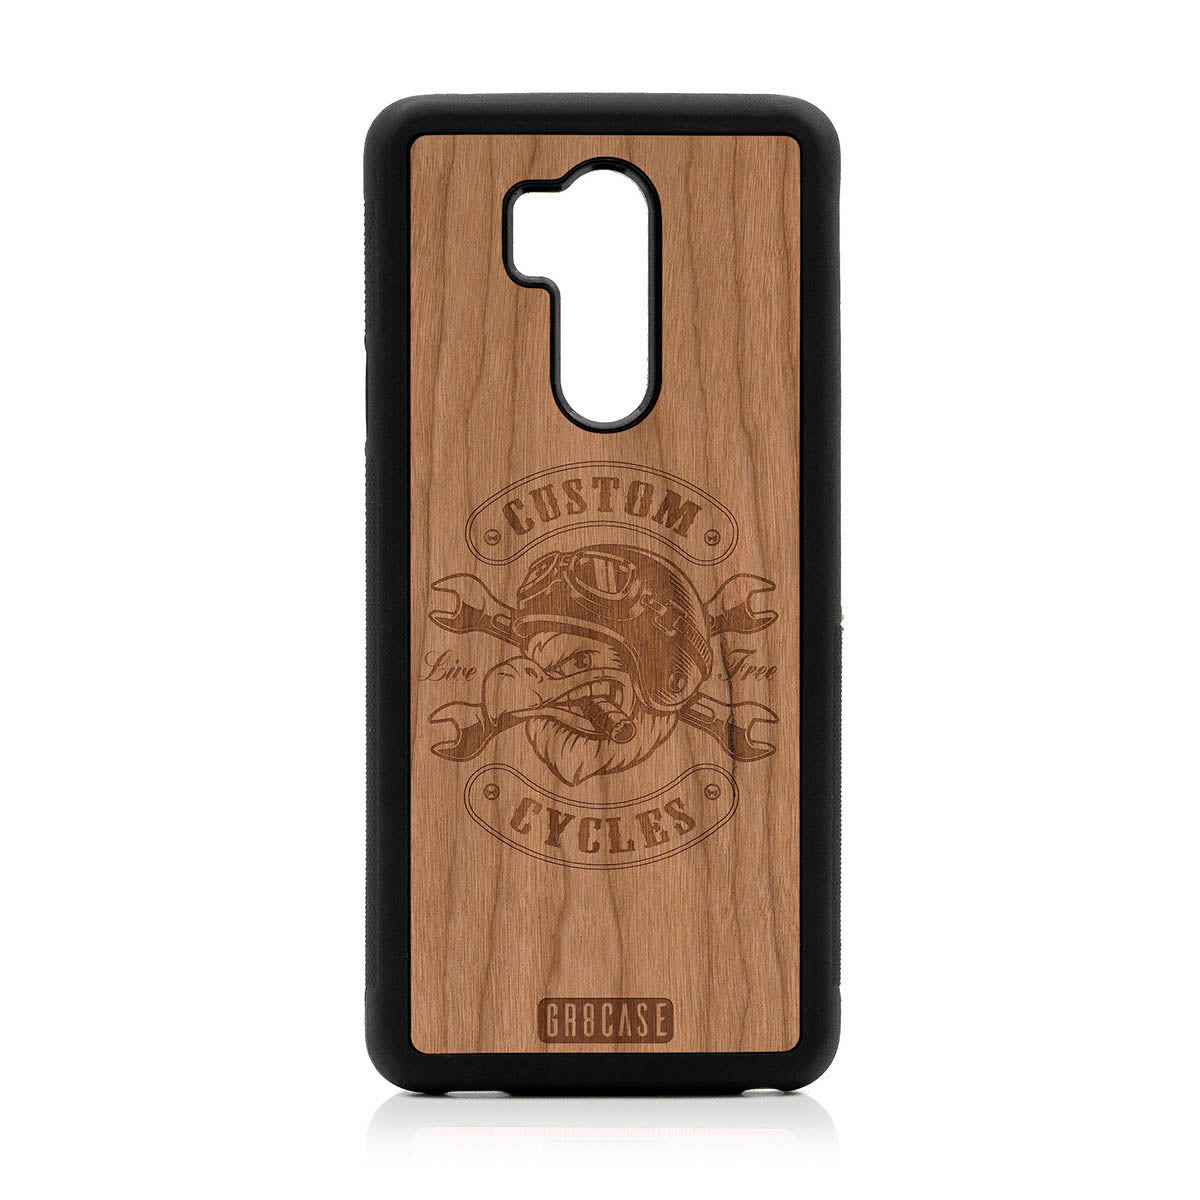 Custom Cycles Live Free (Biker Eagle) Design Wood Case For LG G7 ThinQ by GR8CASE